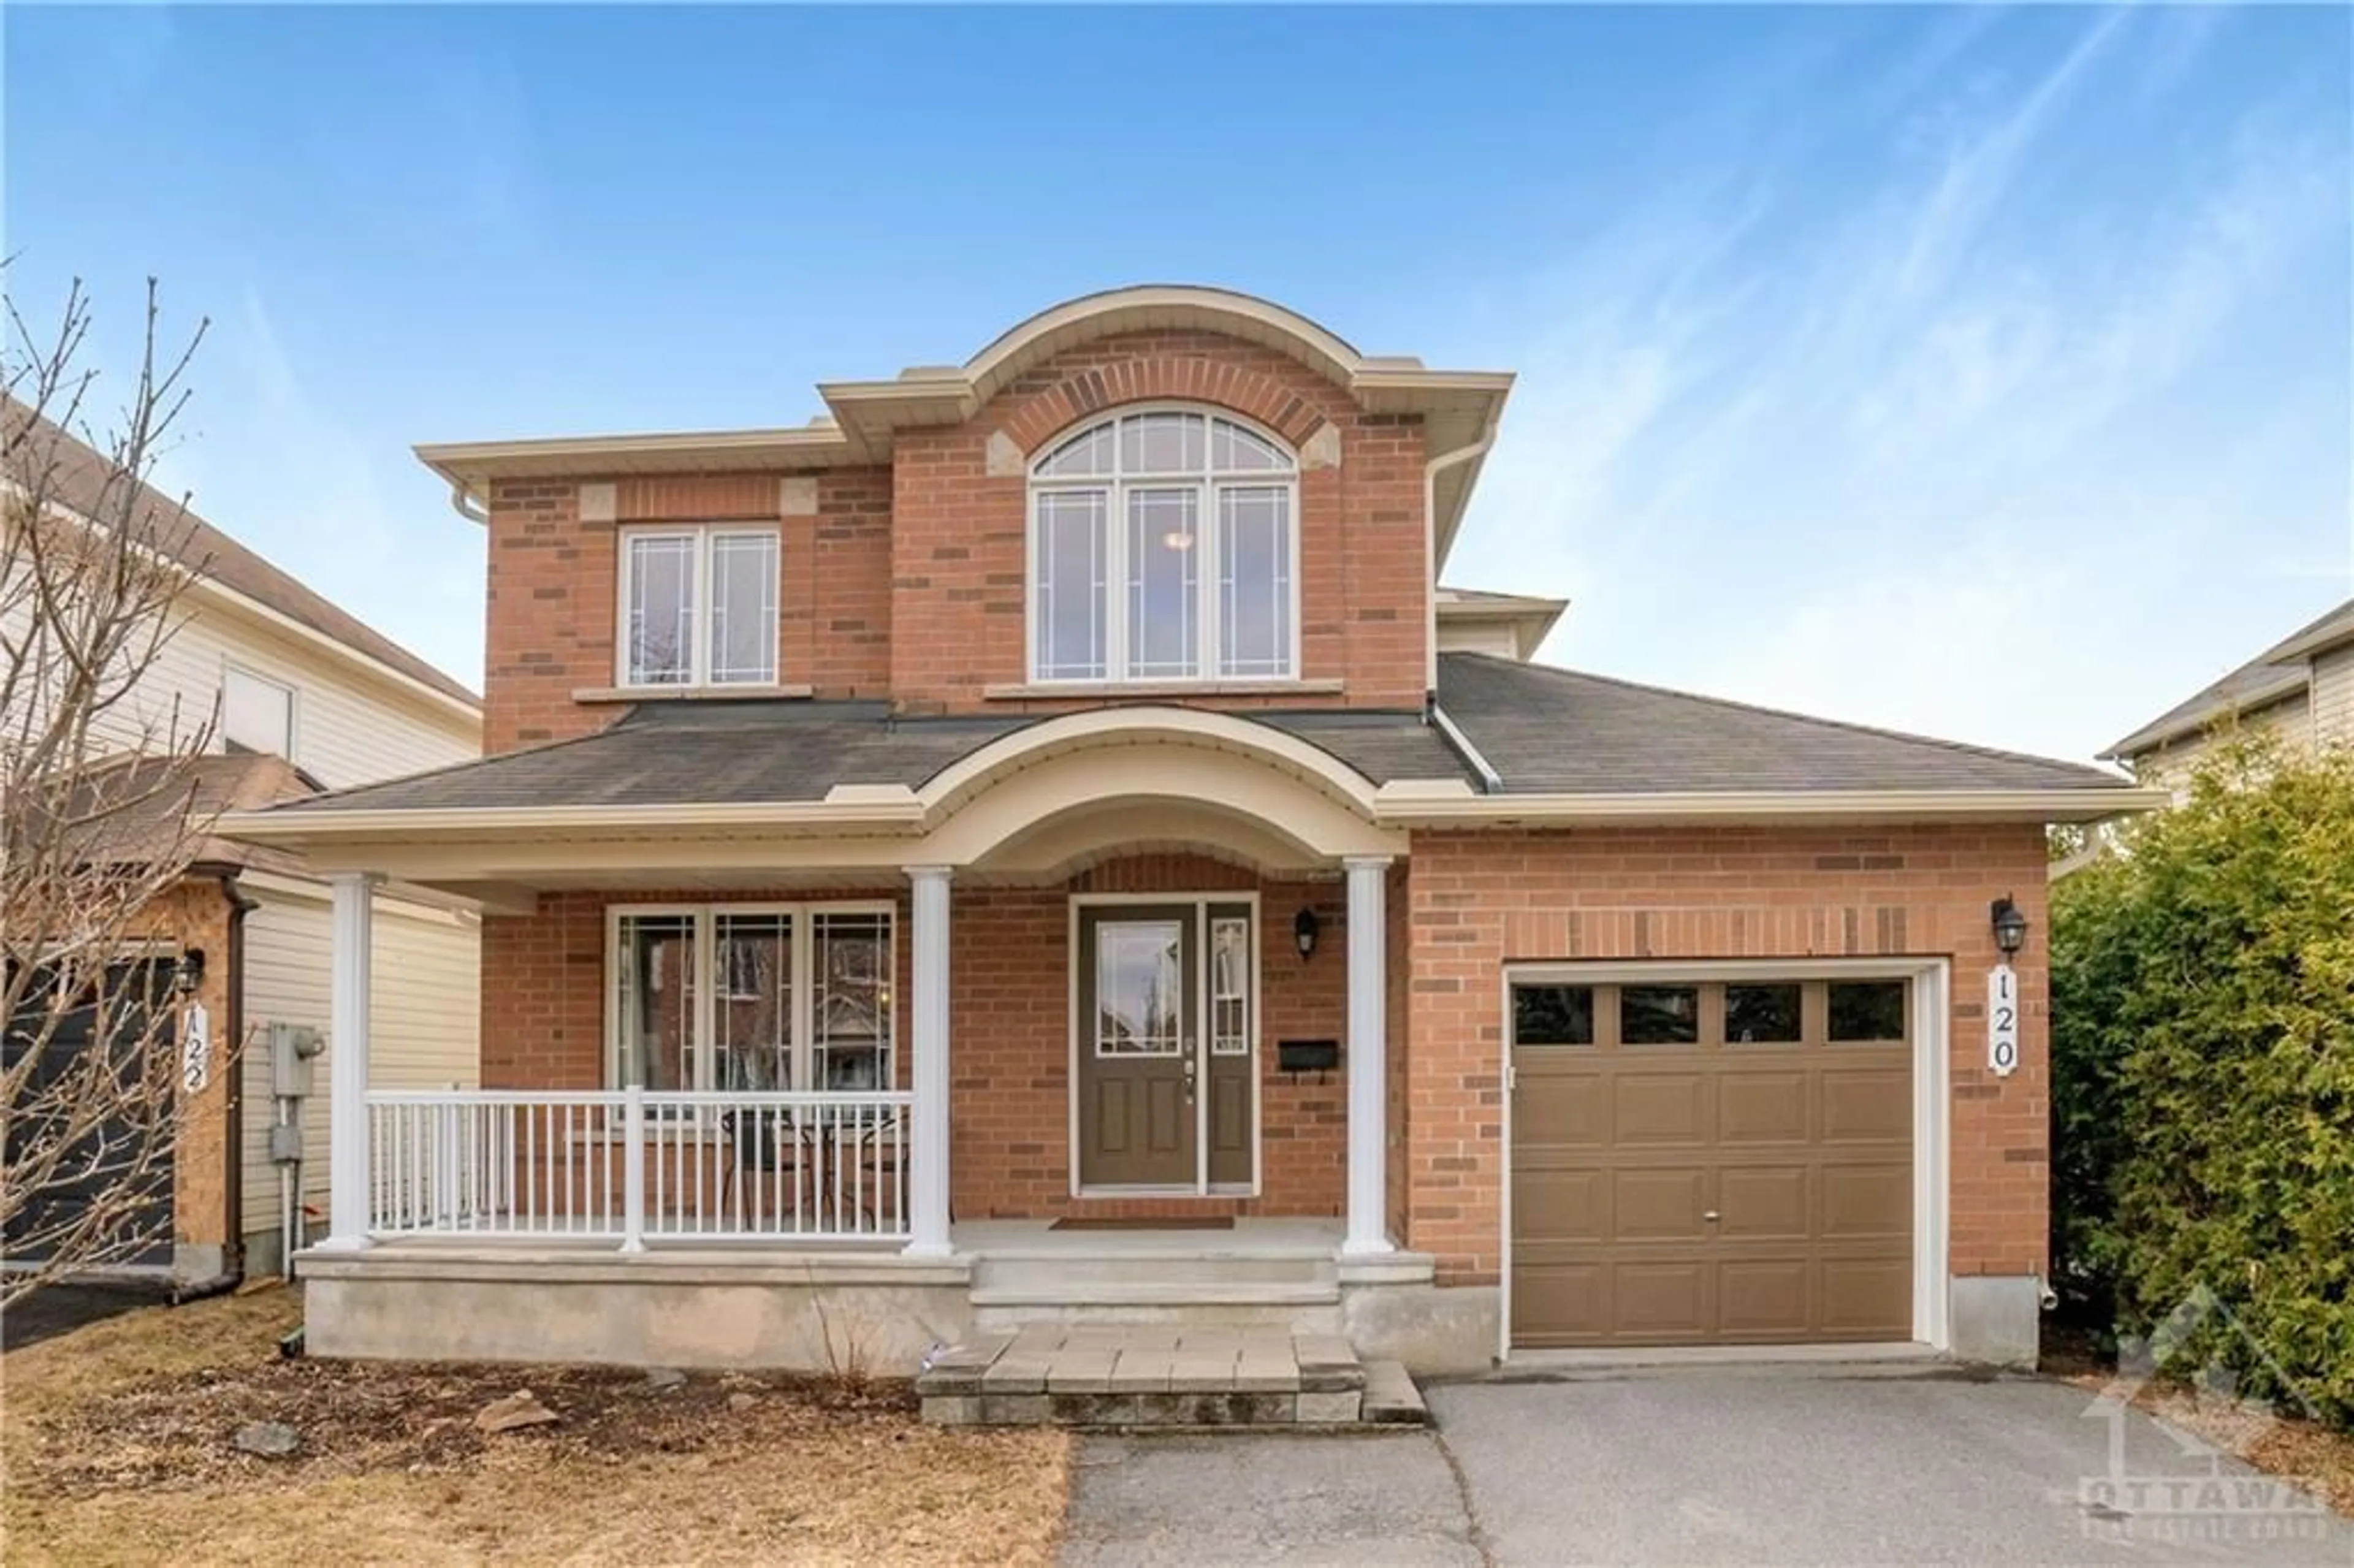 Home with brick exterior material for 120 WHERNSIDE Terr, Ottawa Ontario K2W 0C7